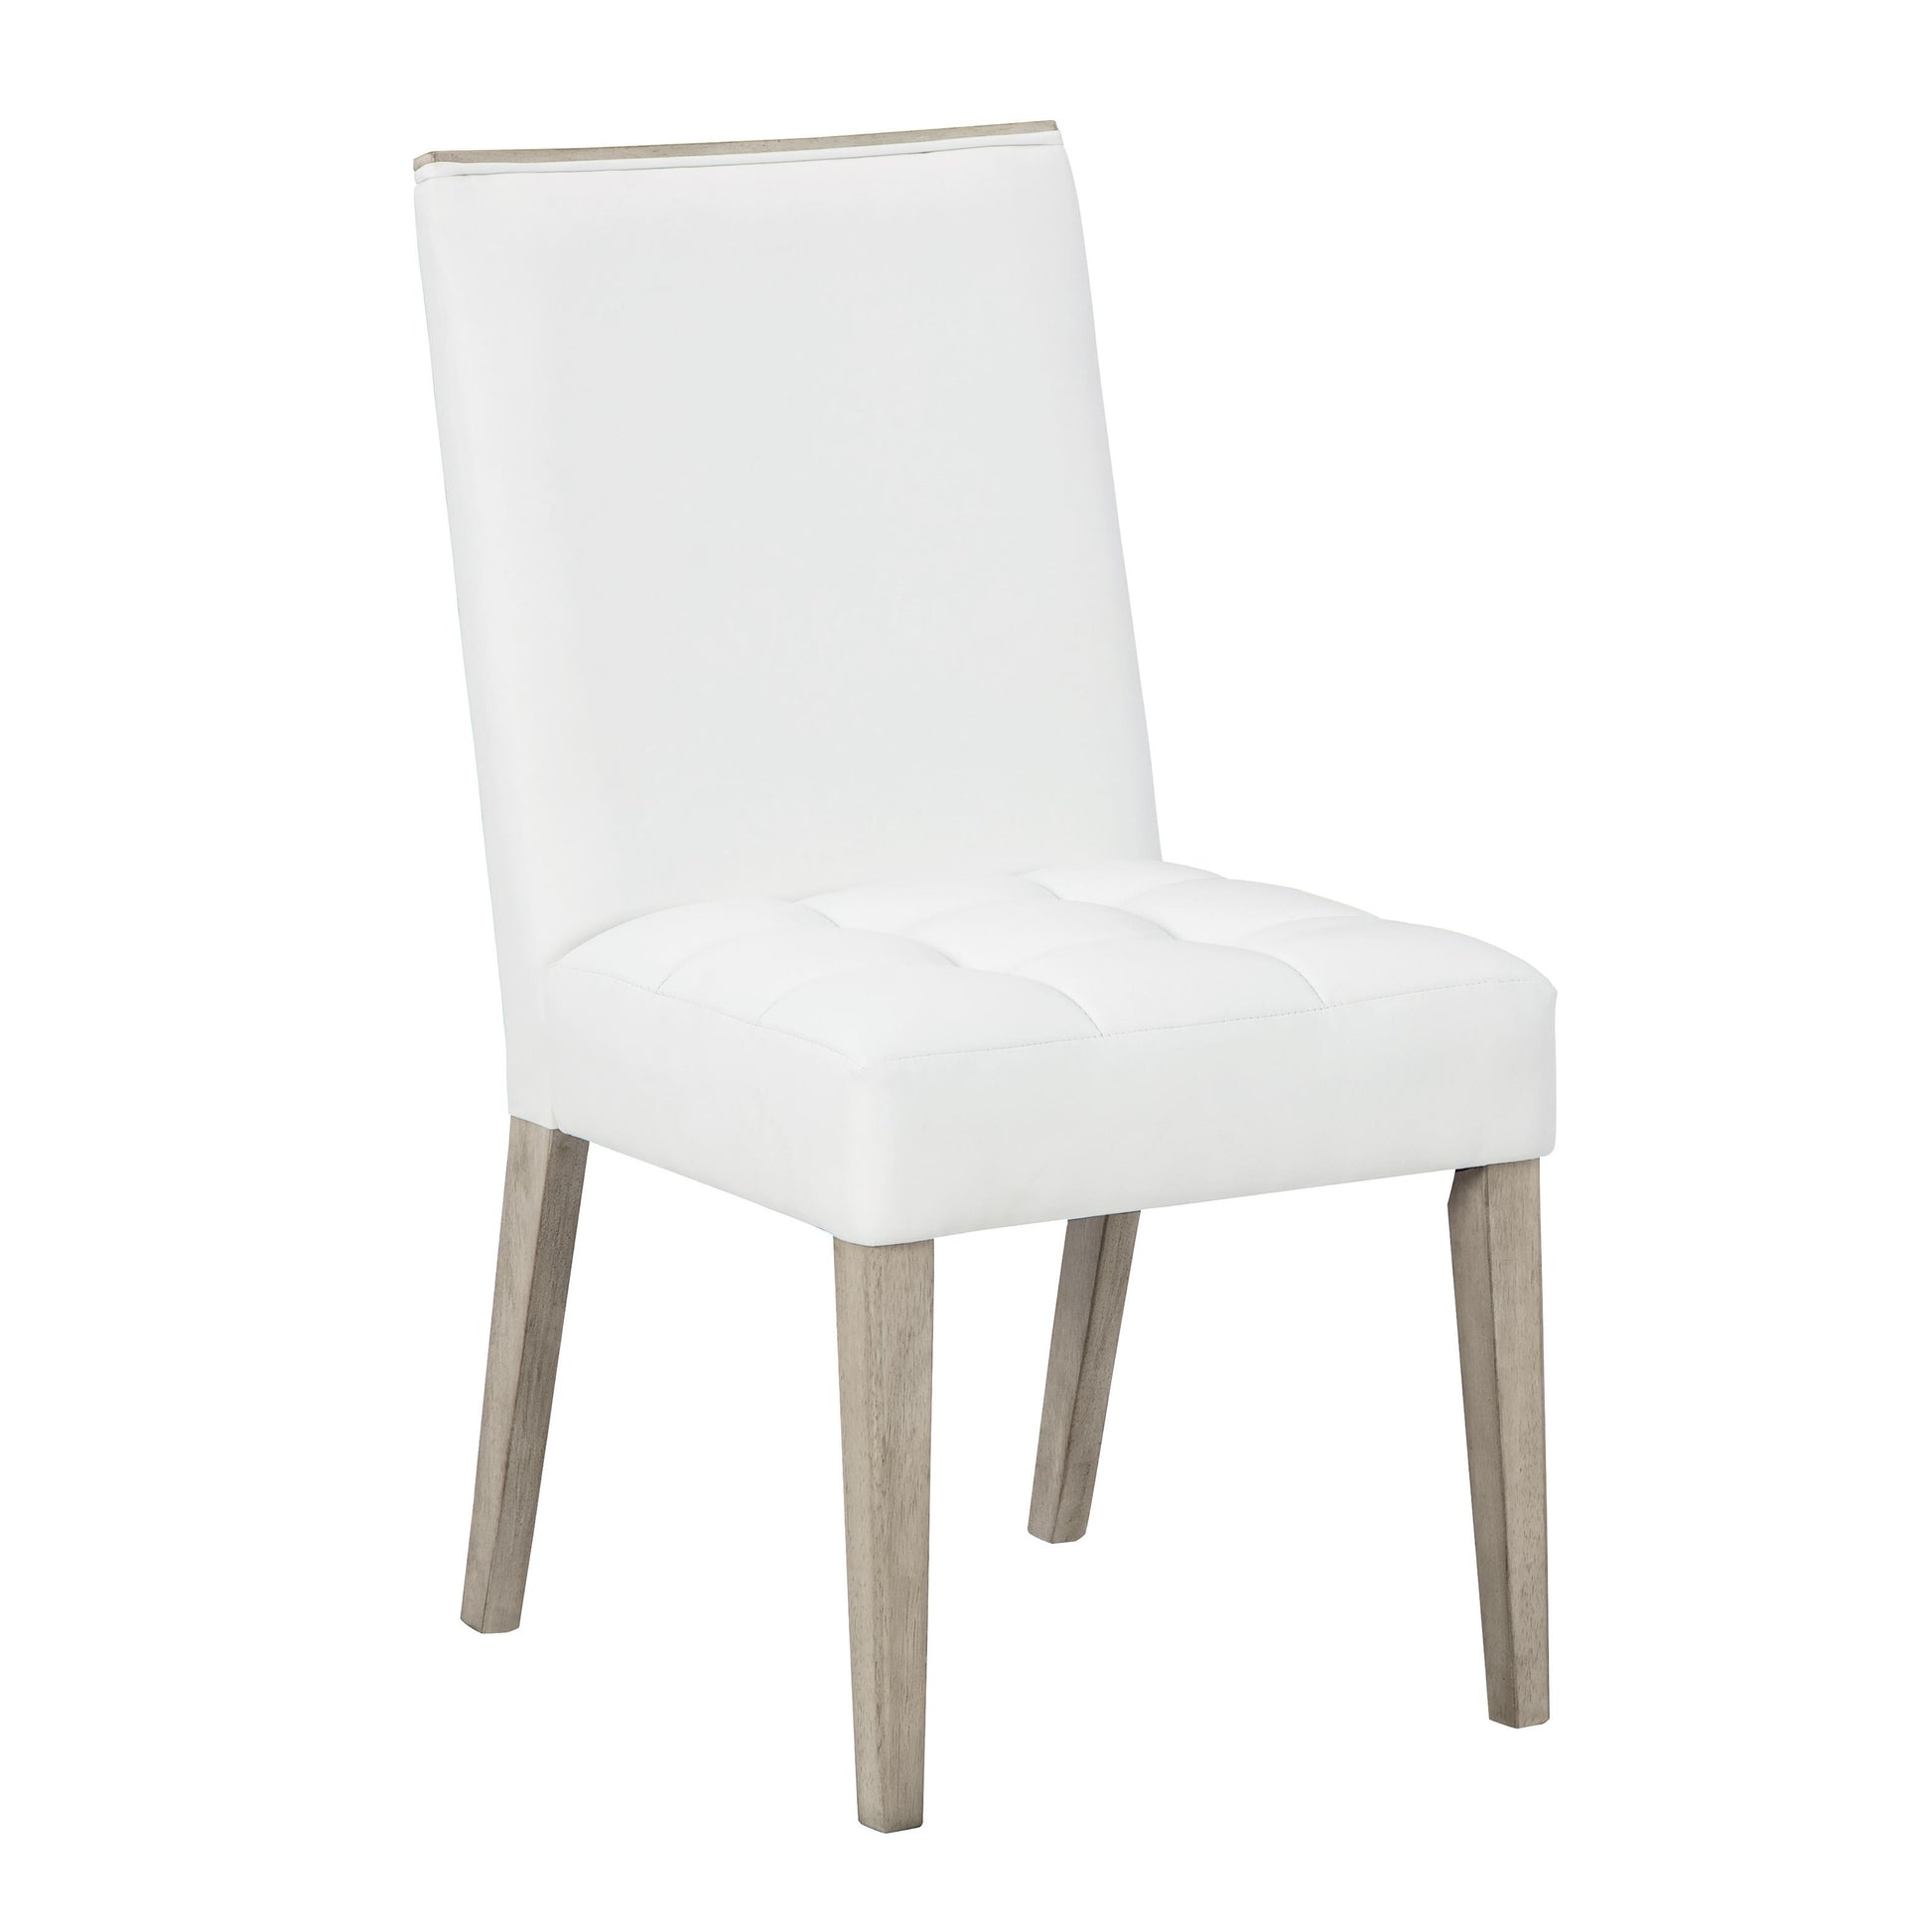 Signature Design by Ashley Wendora Dining Chair D950-01